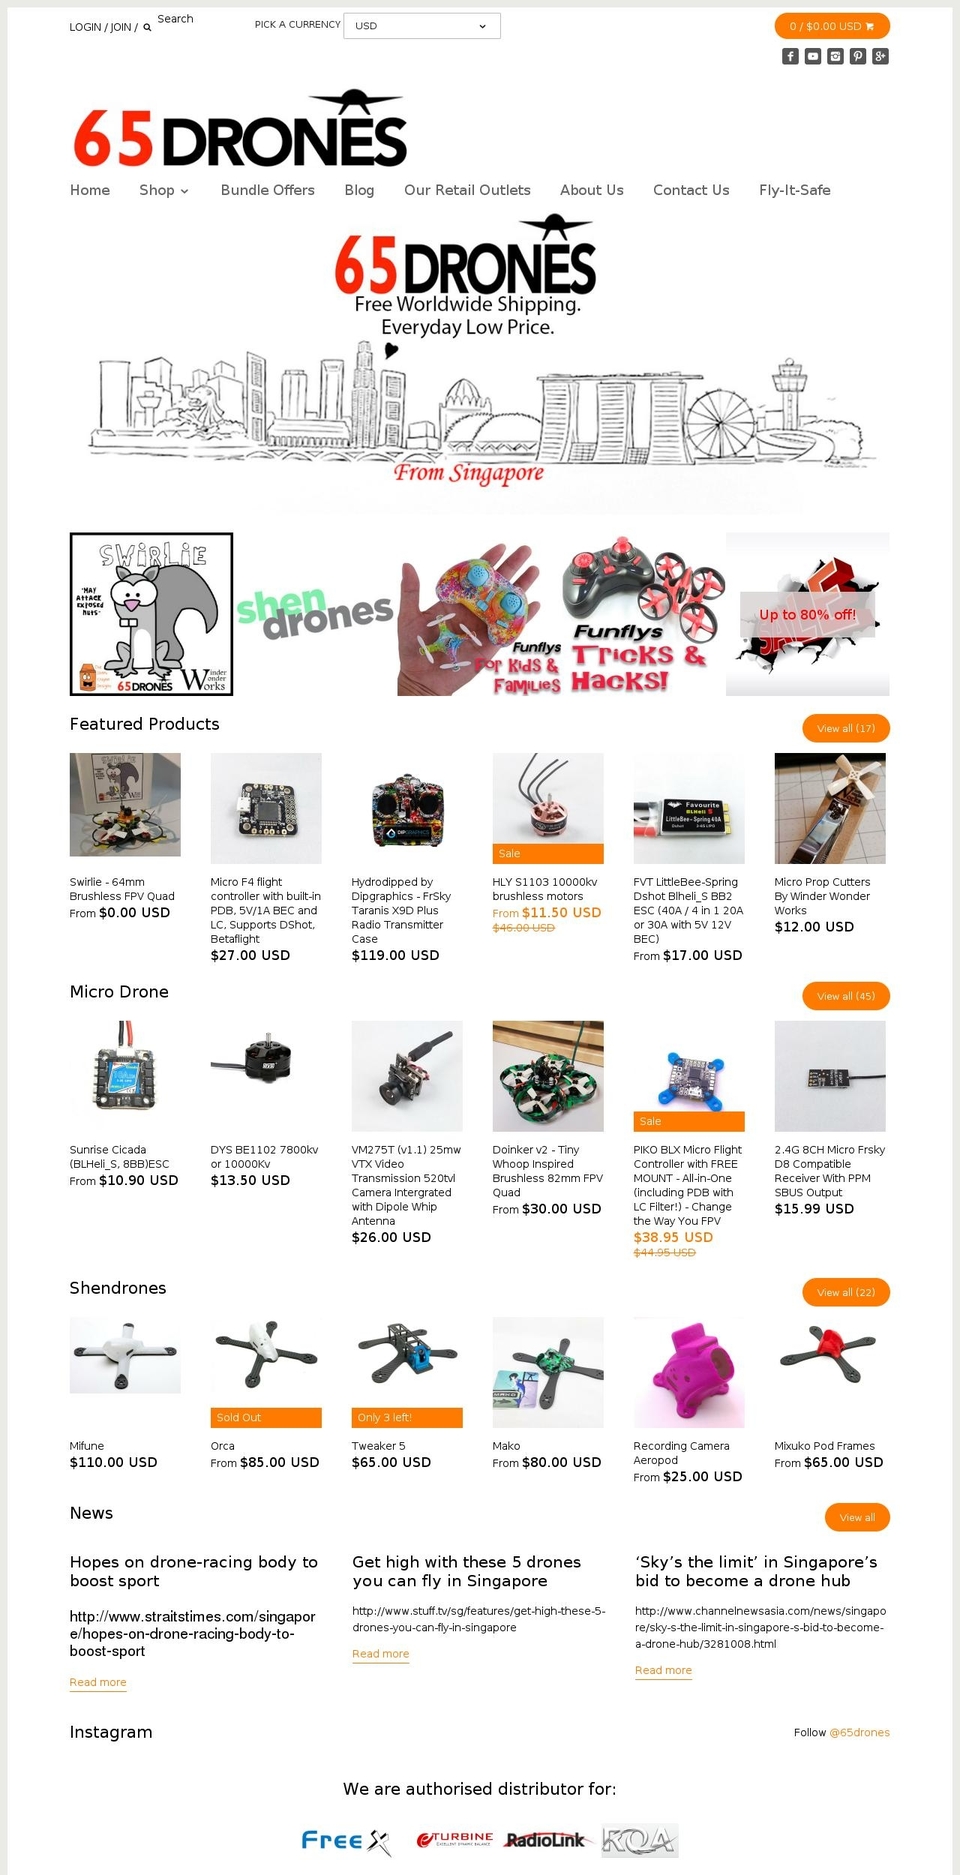 Canopy Shopify theme site example 65drones.com